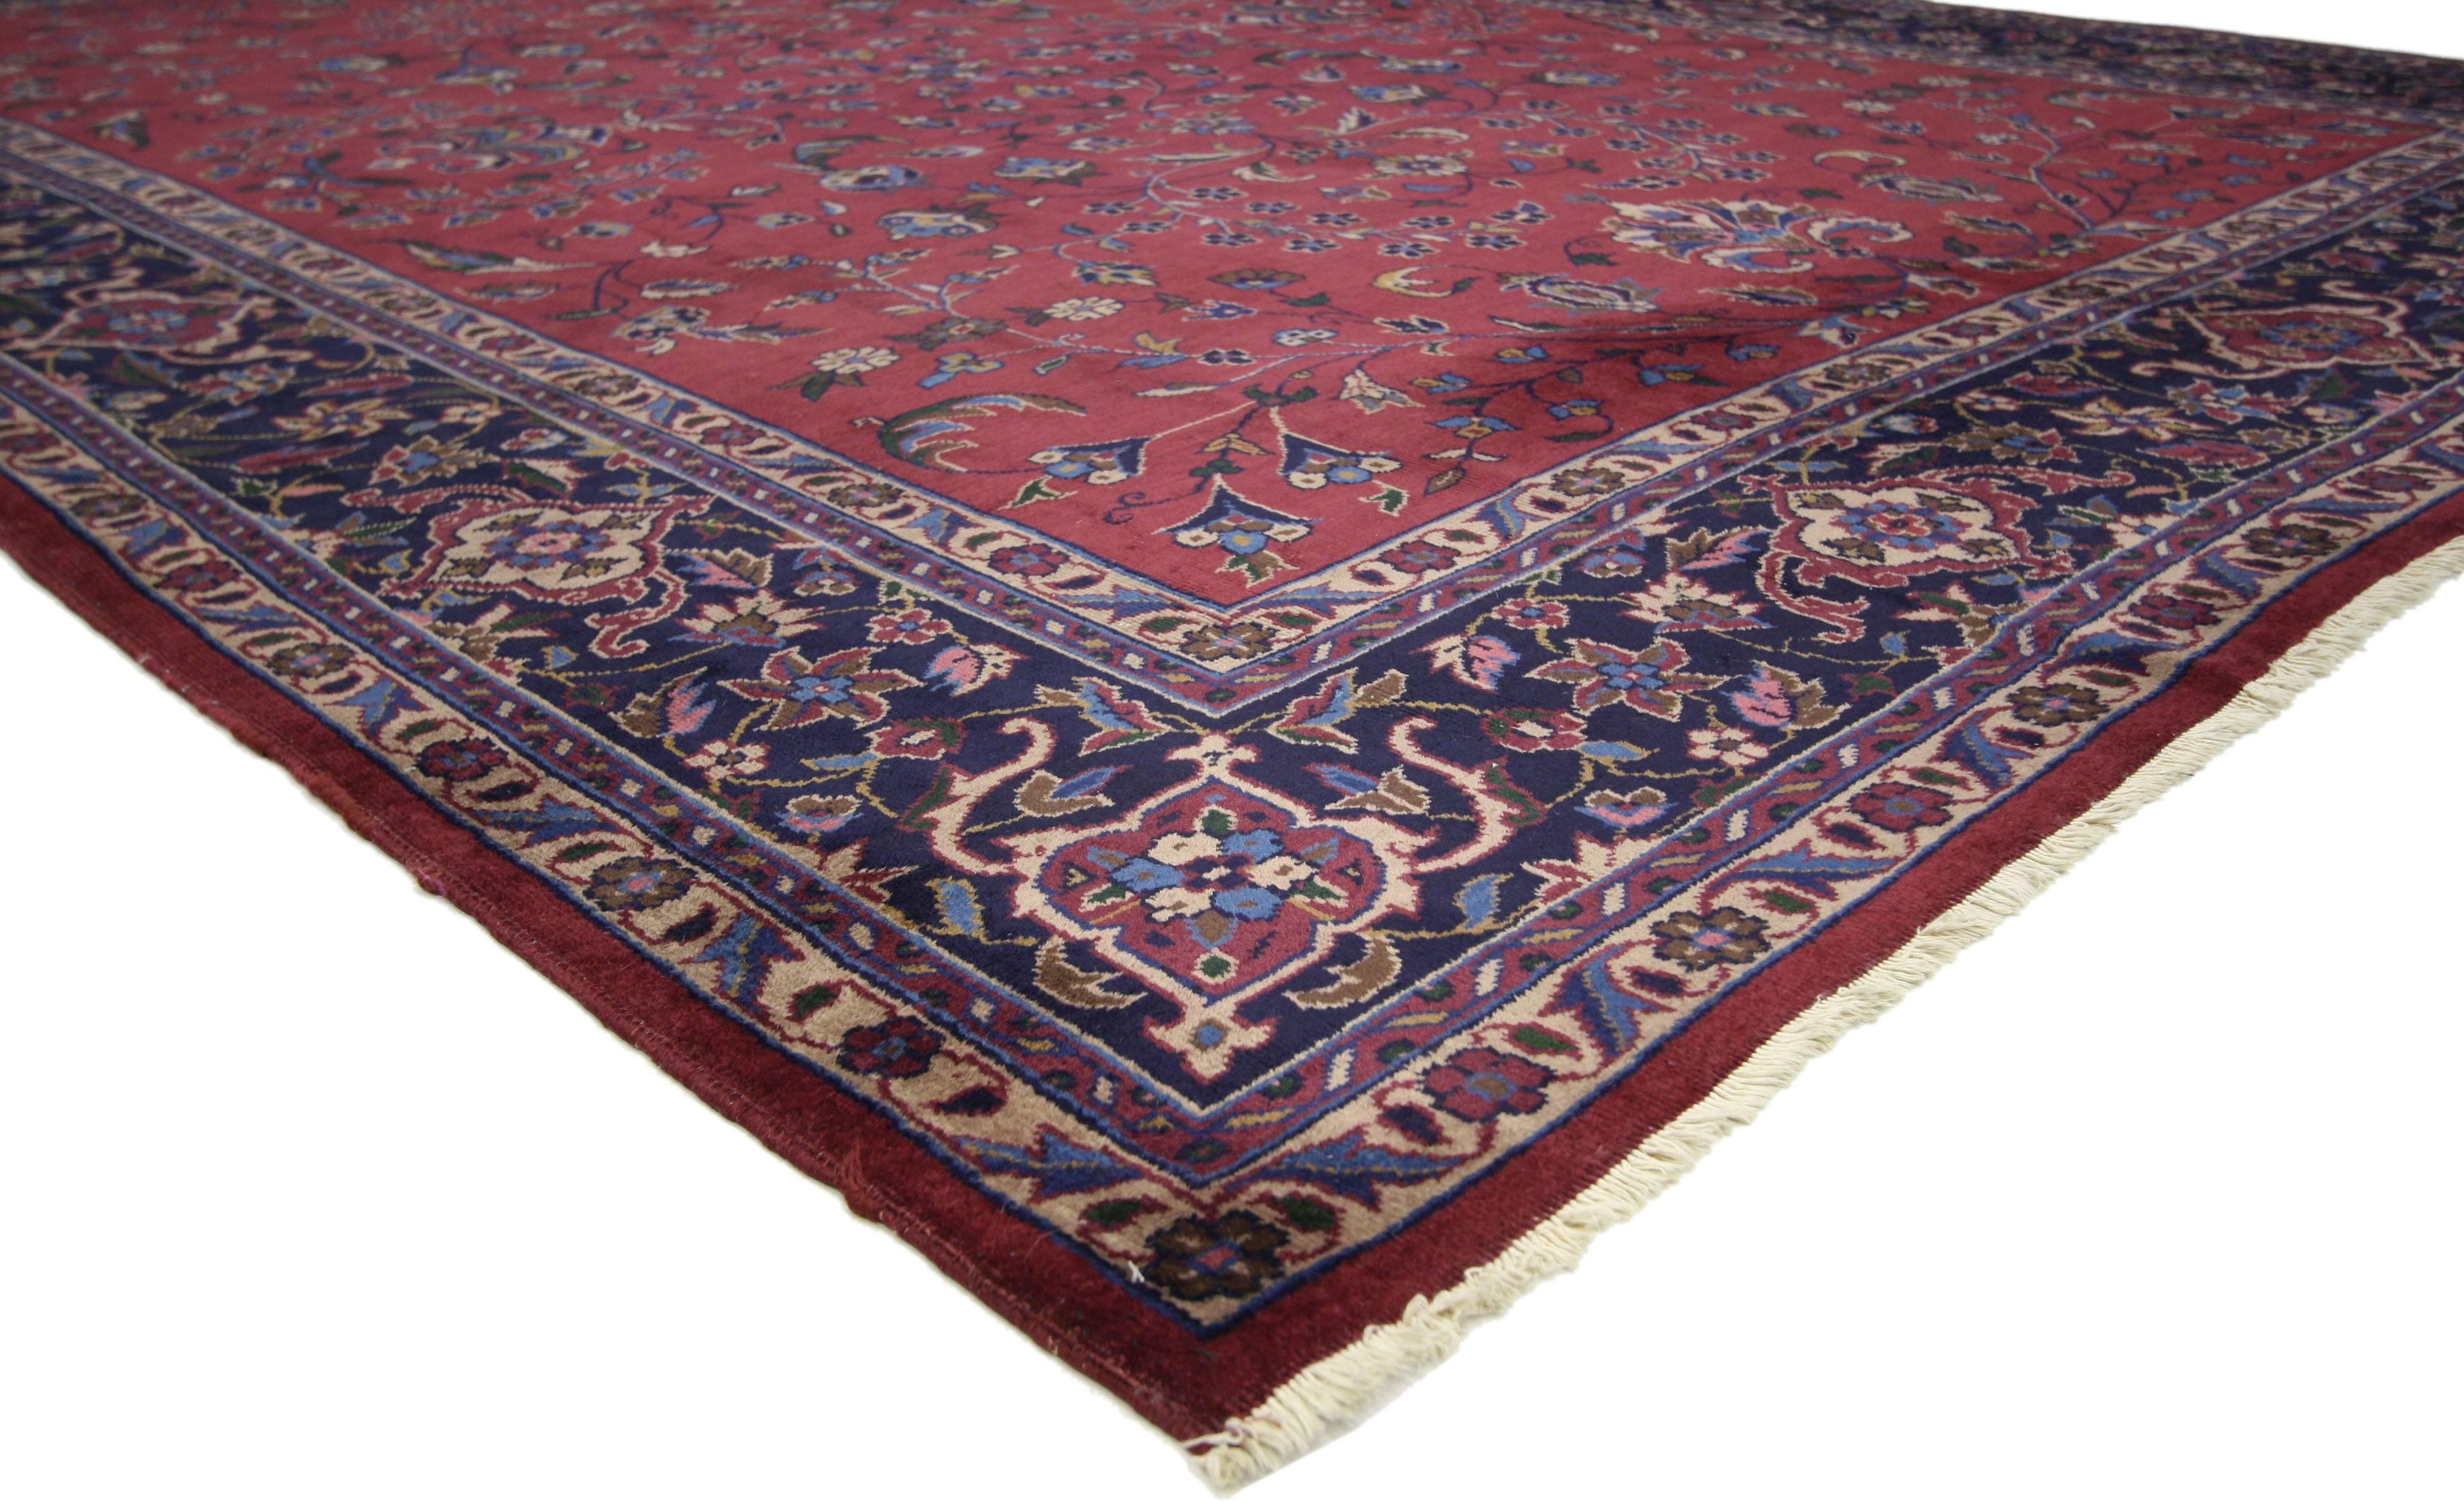 72080, antique Turkish Sparta rug with Modern Victorian Style 08'08 x 11'11. This hand-knotted wool antique Turkish Sparta rug features an allover floral pattern on a dark raspberry field surrounded by a classic navy blue border creating a